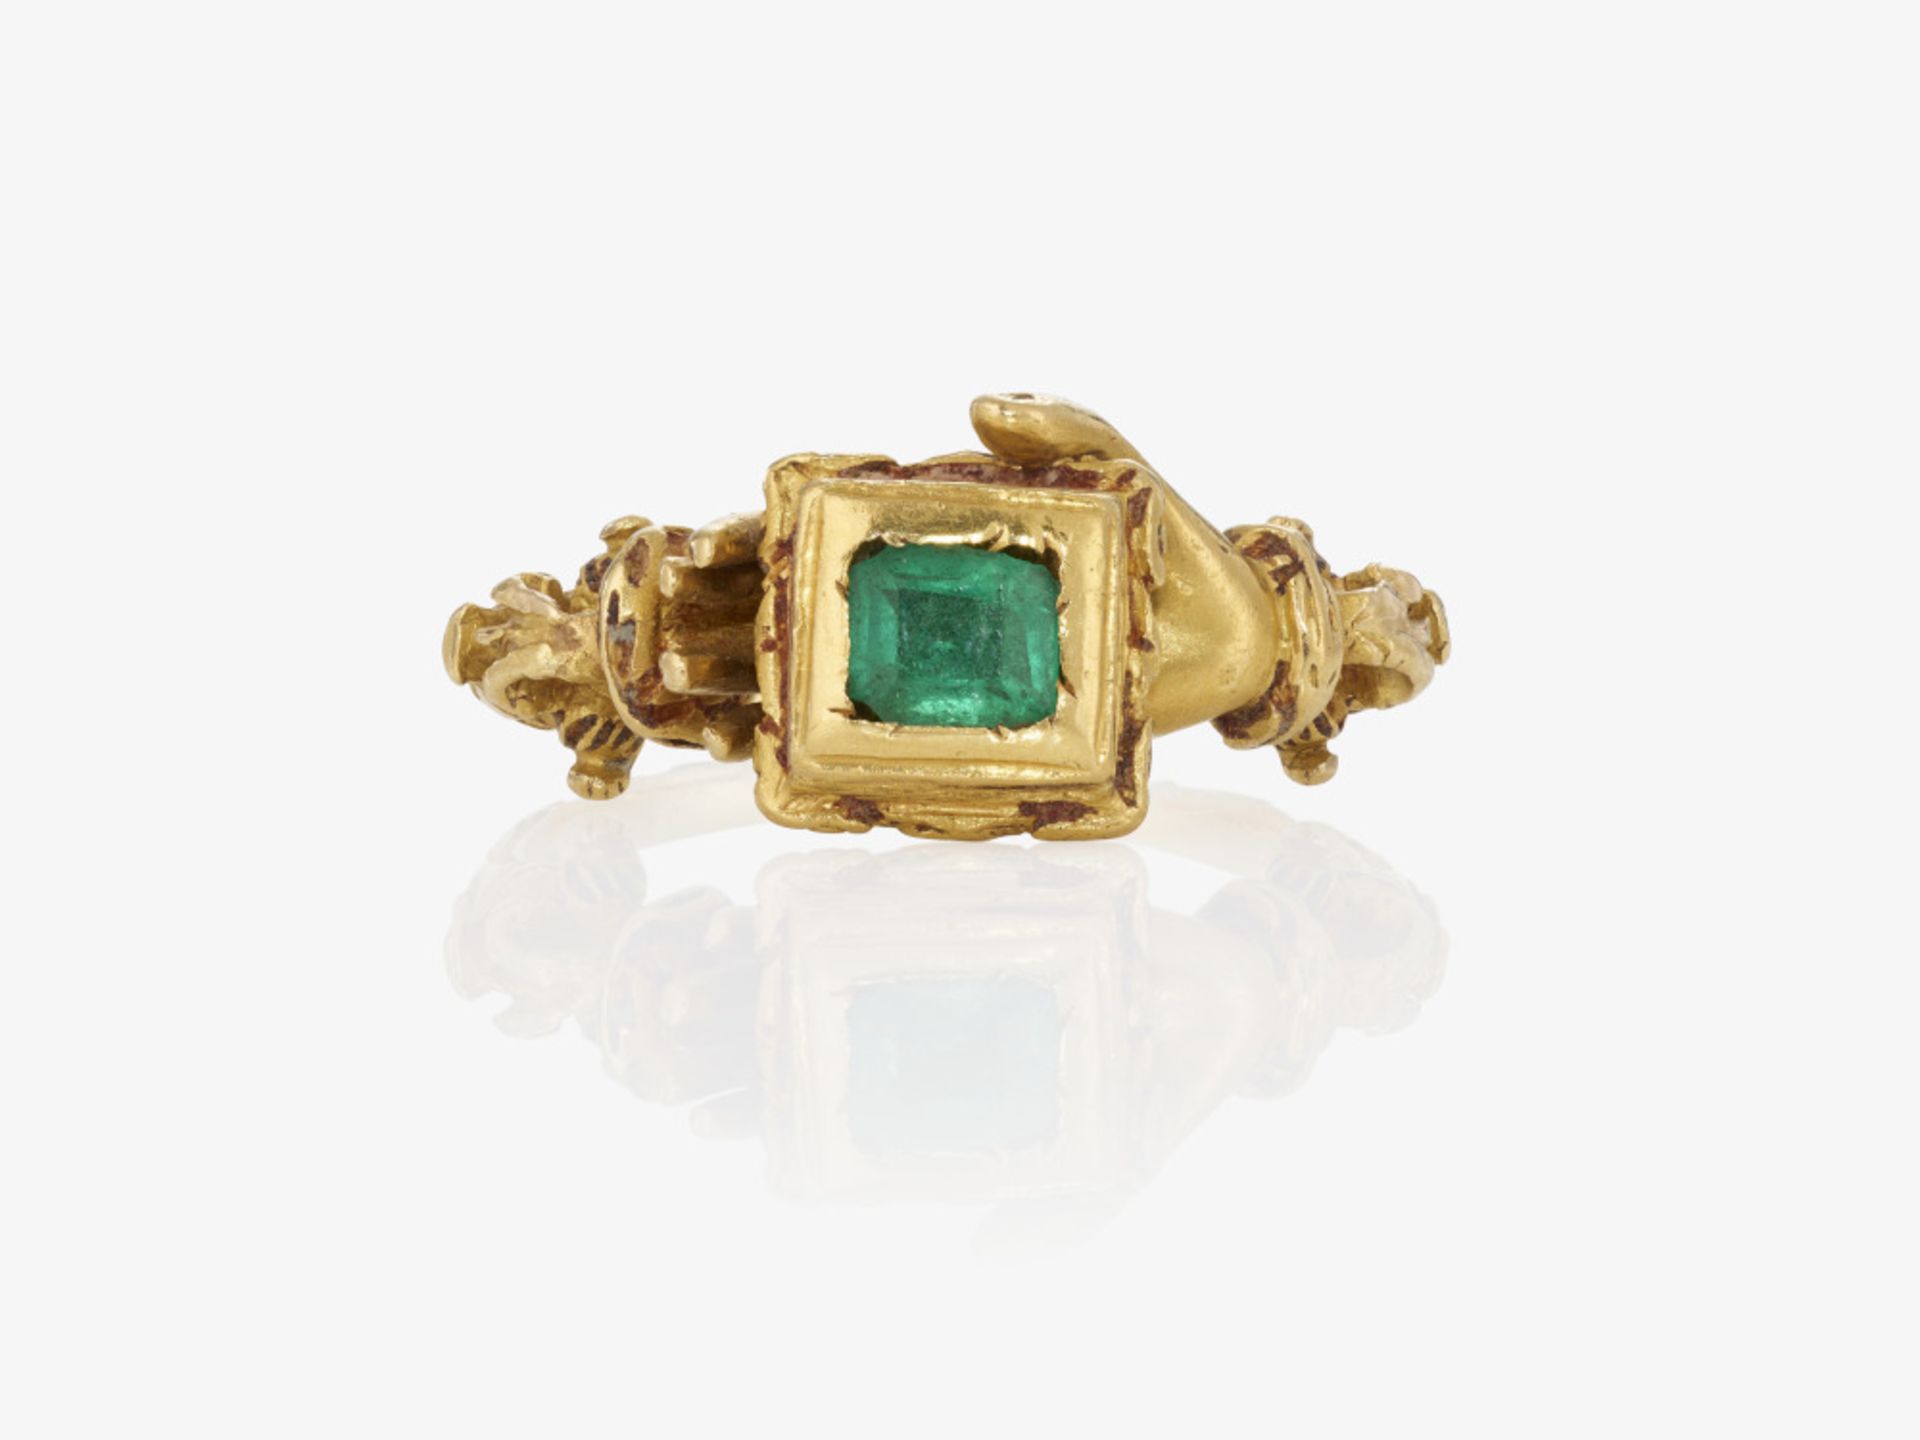 An emerald ring - Probably early 17th century - Image 2 of 2